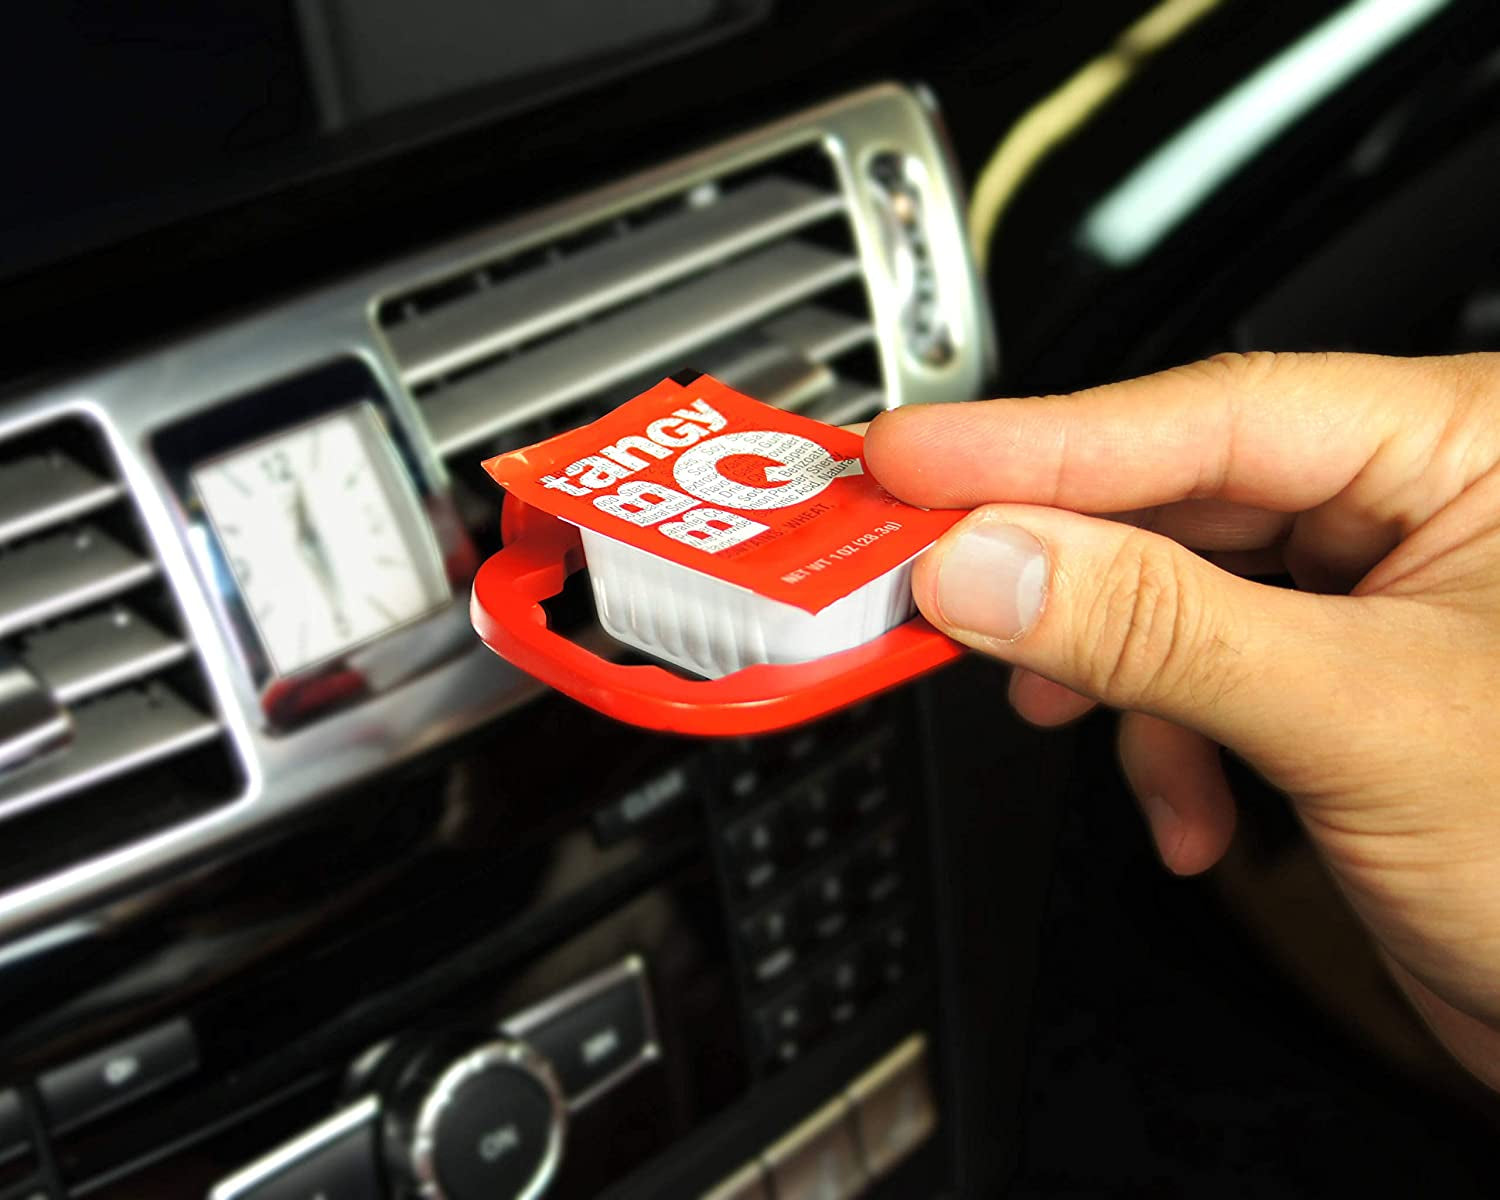 Dip Clip | an In-Car Sauce Holder for Ketchup and Dipping Sauces. as Seen on Shark Tank (2 Pack, Black)